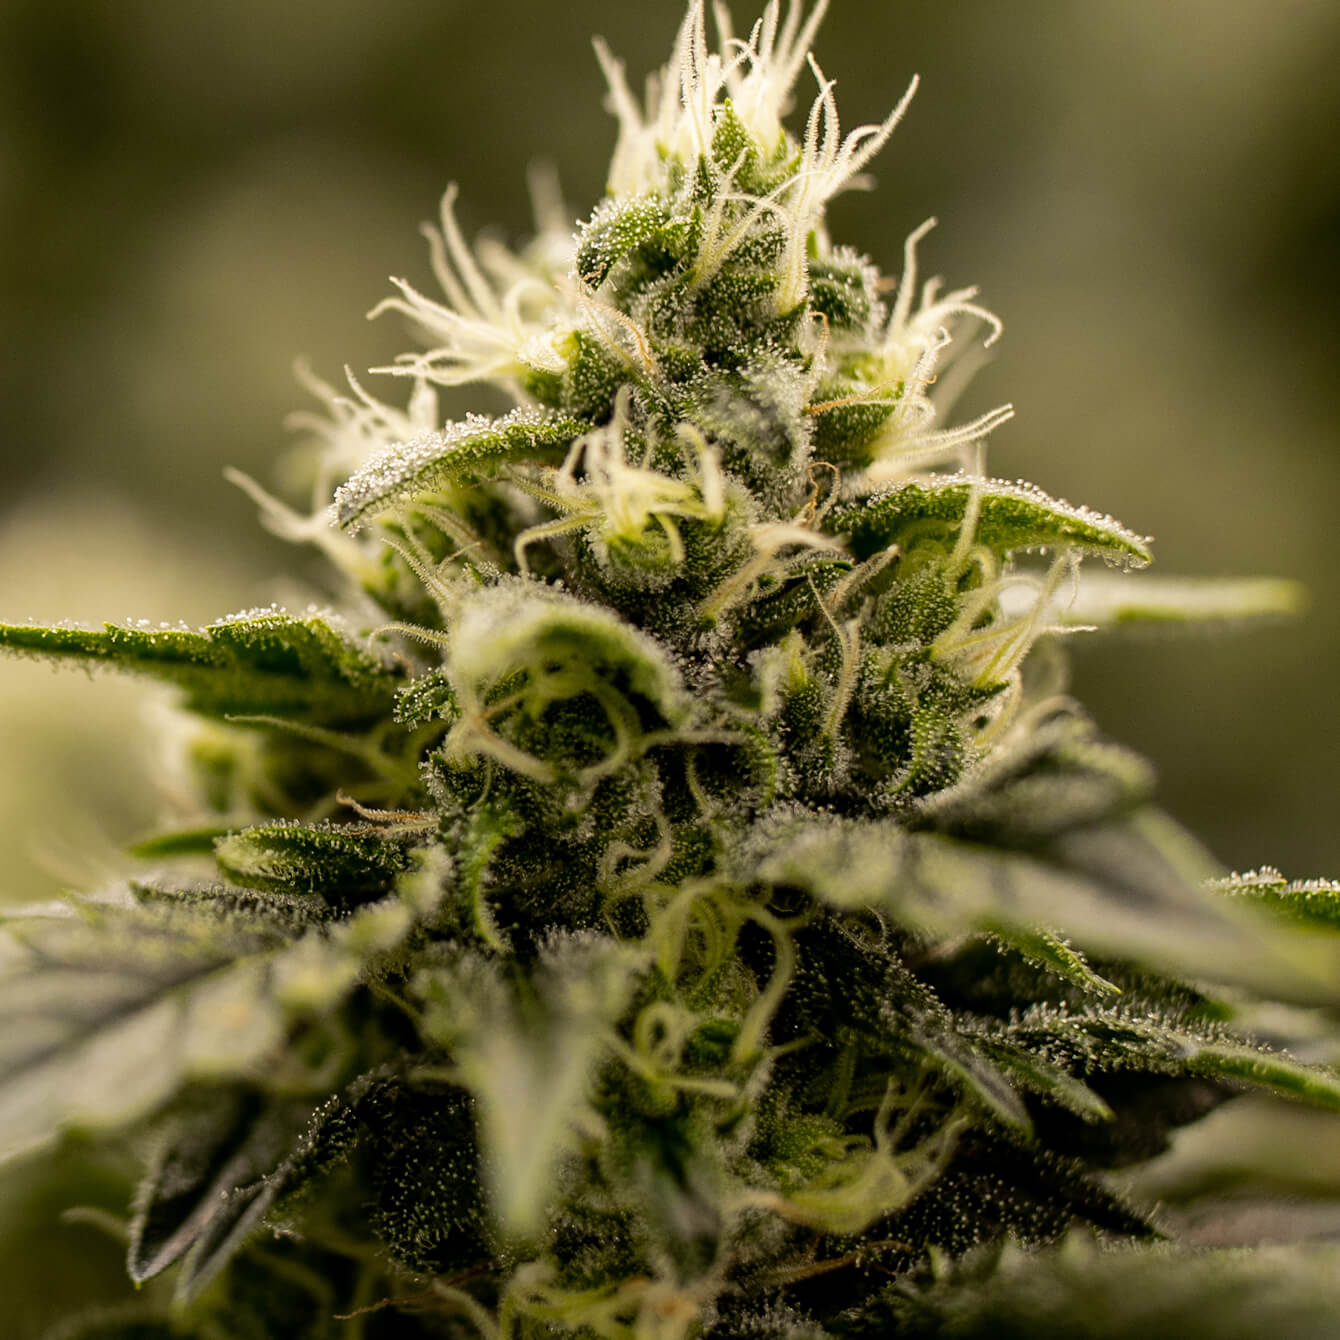 Featured Flower: Cold Creek Kush